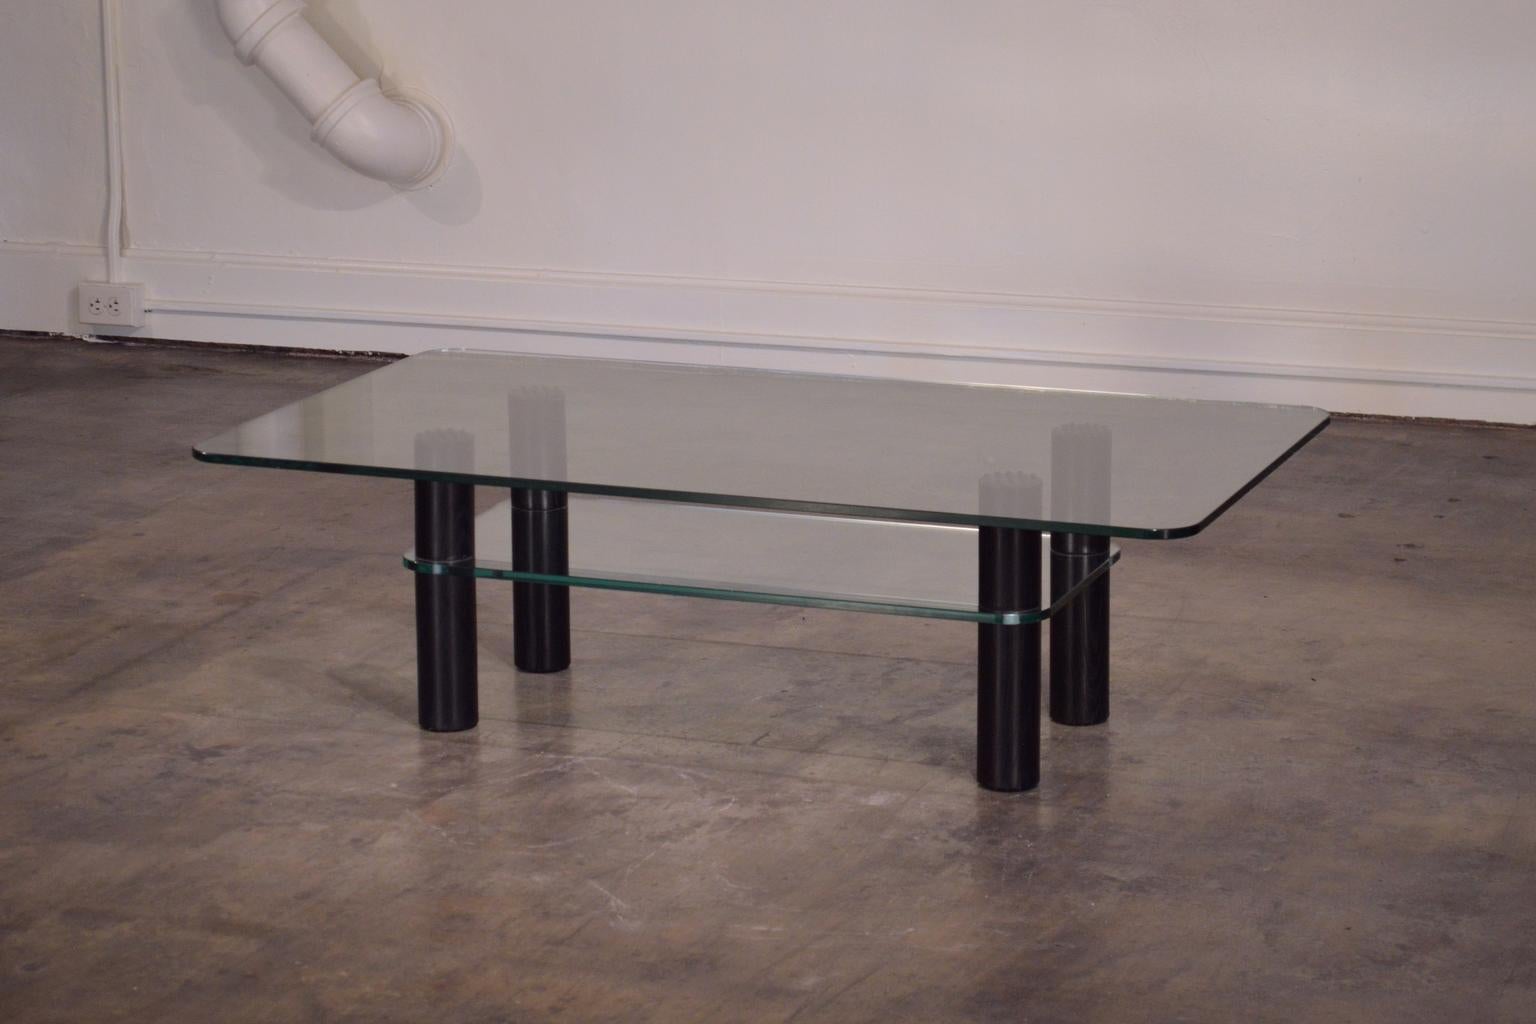 Attributed to Alessi, this sleek Postmodern coffee table features black stained oak legs, thick floating glass top, and adjustable glass shelf. The glass is edged with a very Fine bezel cut and has softened round corners. The legs unscrew and are